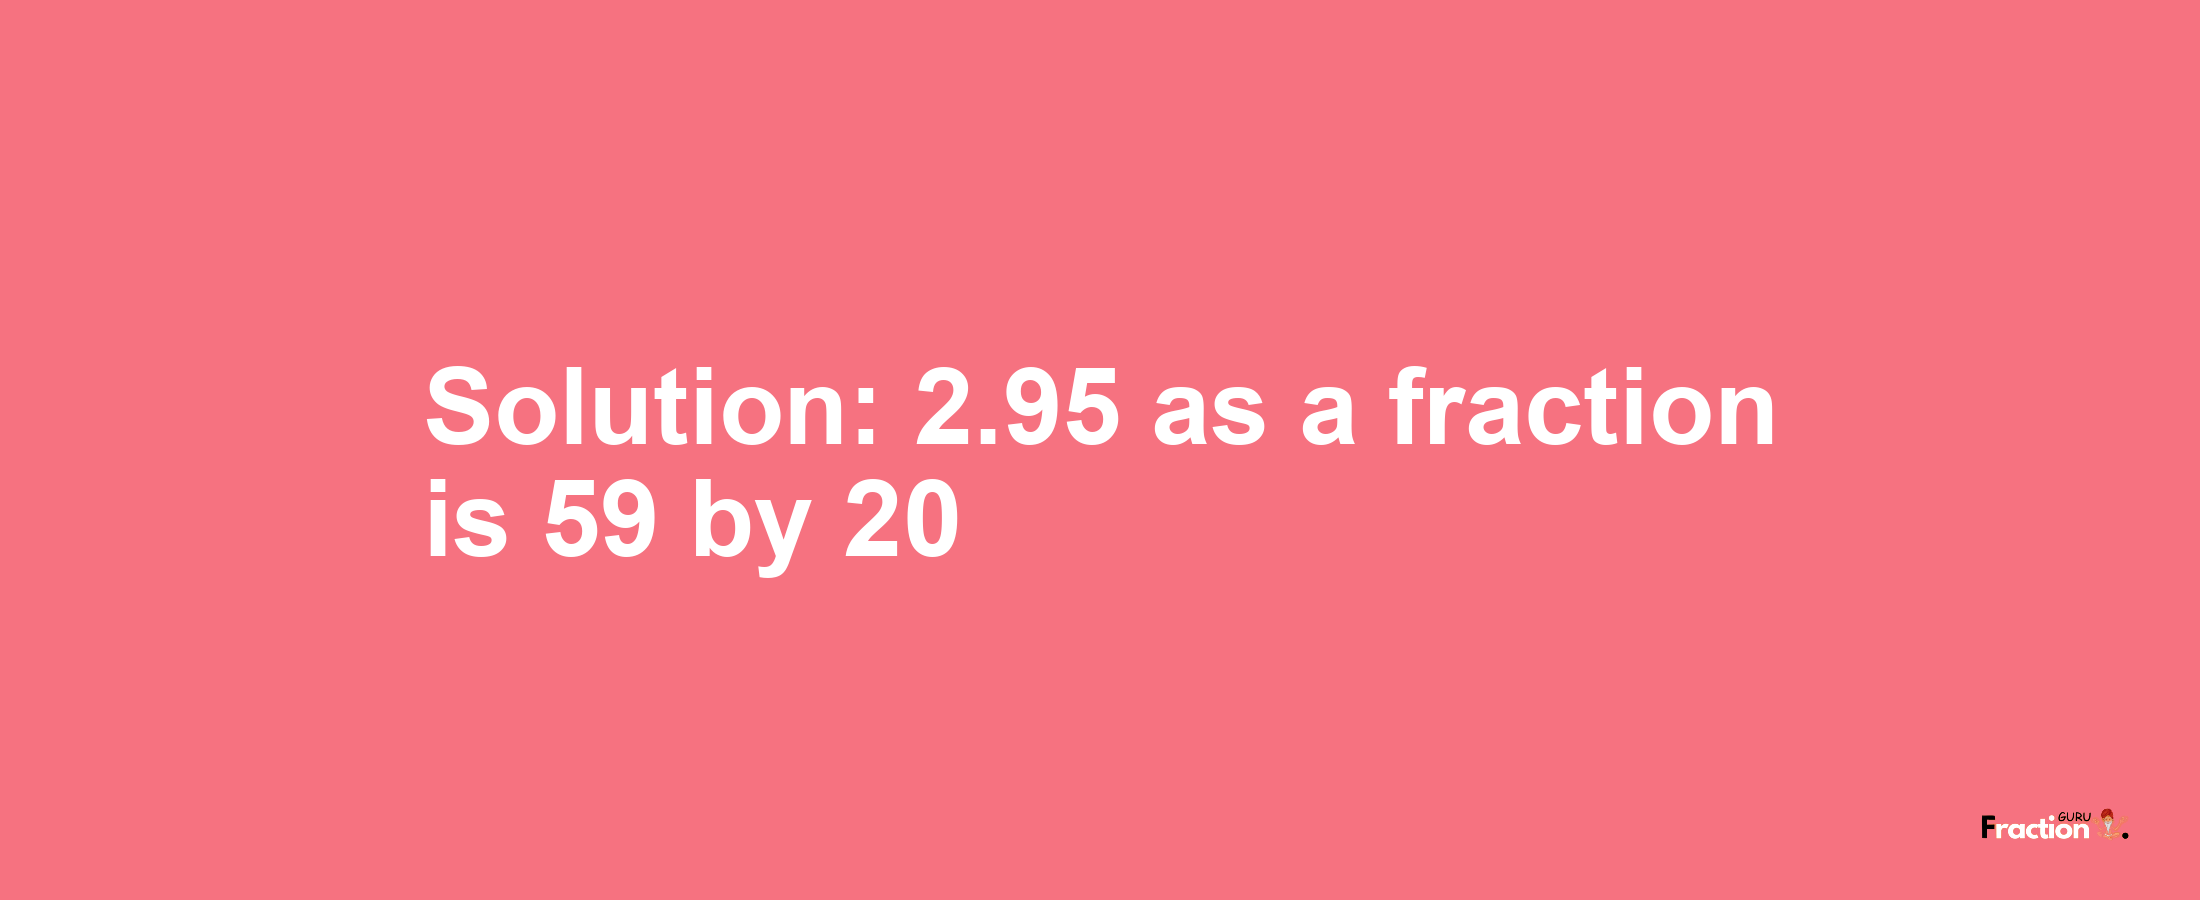 Solution:2.95 as a fraction is 59/20